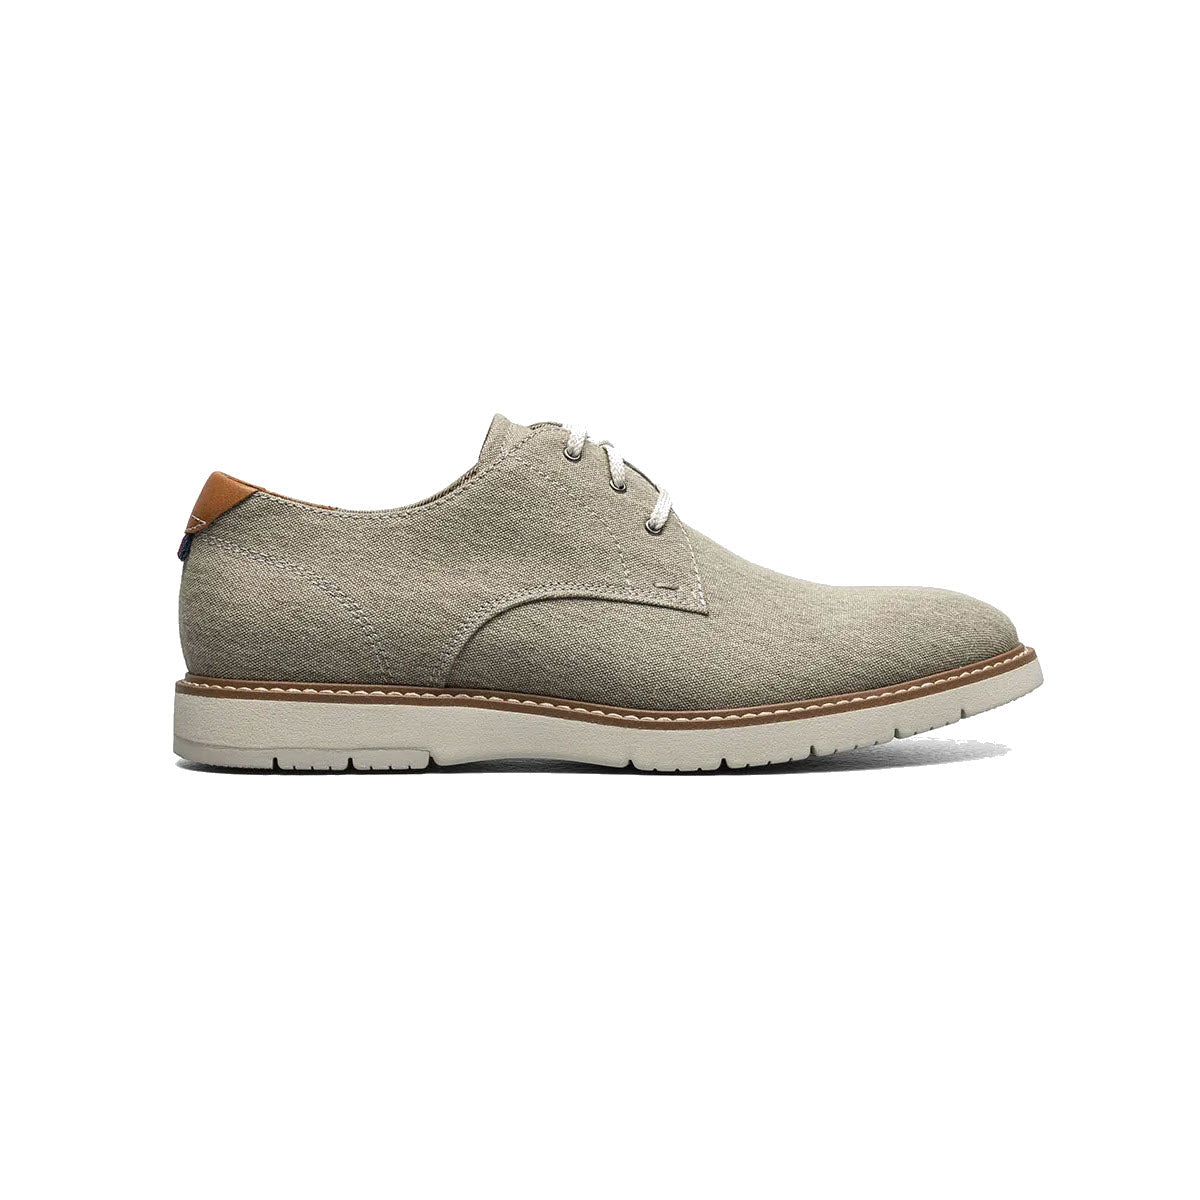 Side view of a light gray Florsheim men's Vibe Canvas Plain Toe Oxford shoe with tan leather trim and white soles against a white background.